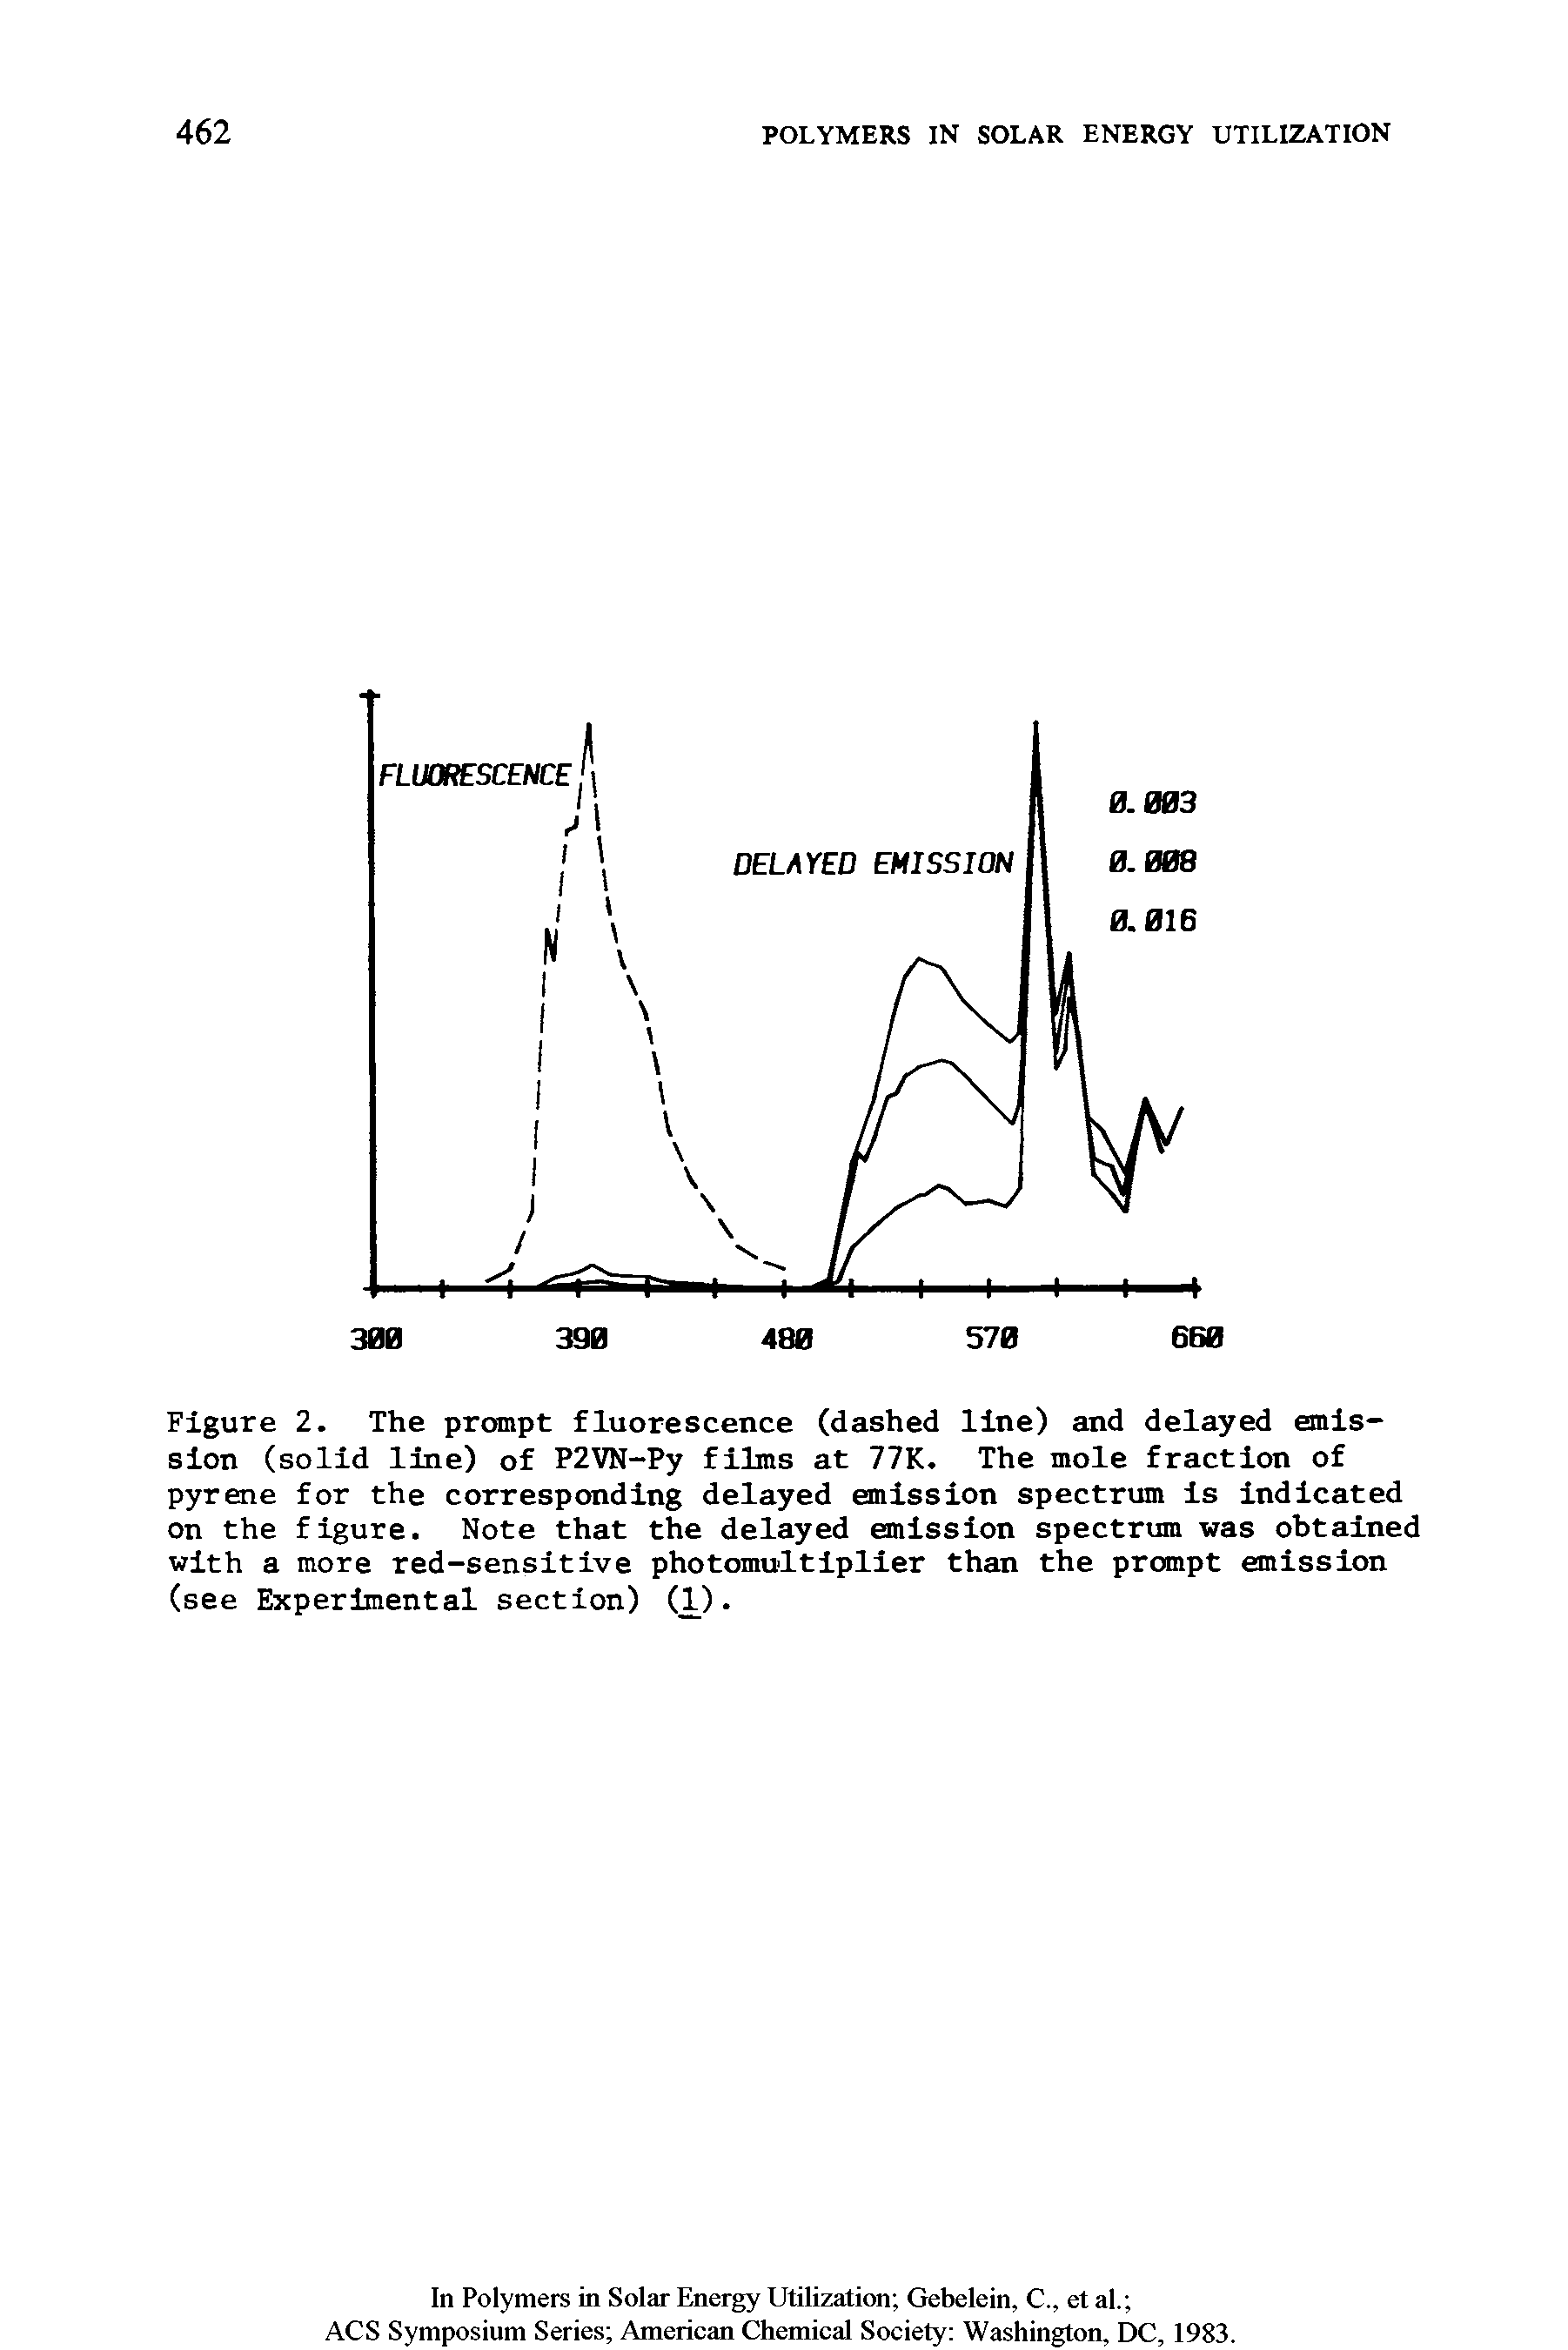 Figure 2. The prompt fluorescence (dashed line) and delayed emission (solid line) of P2VN-Py films at 77K. The mole fraction of pyrene for the corresponding delayed emission spectrum is indicated on the figure. Note that the delayed emission spectrum was obtained with a more red-sensitive photomultiplier than the prompt emission (see Experimental section) (1).